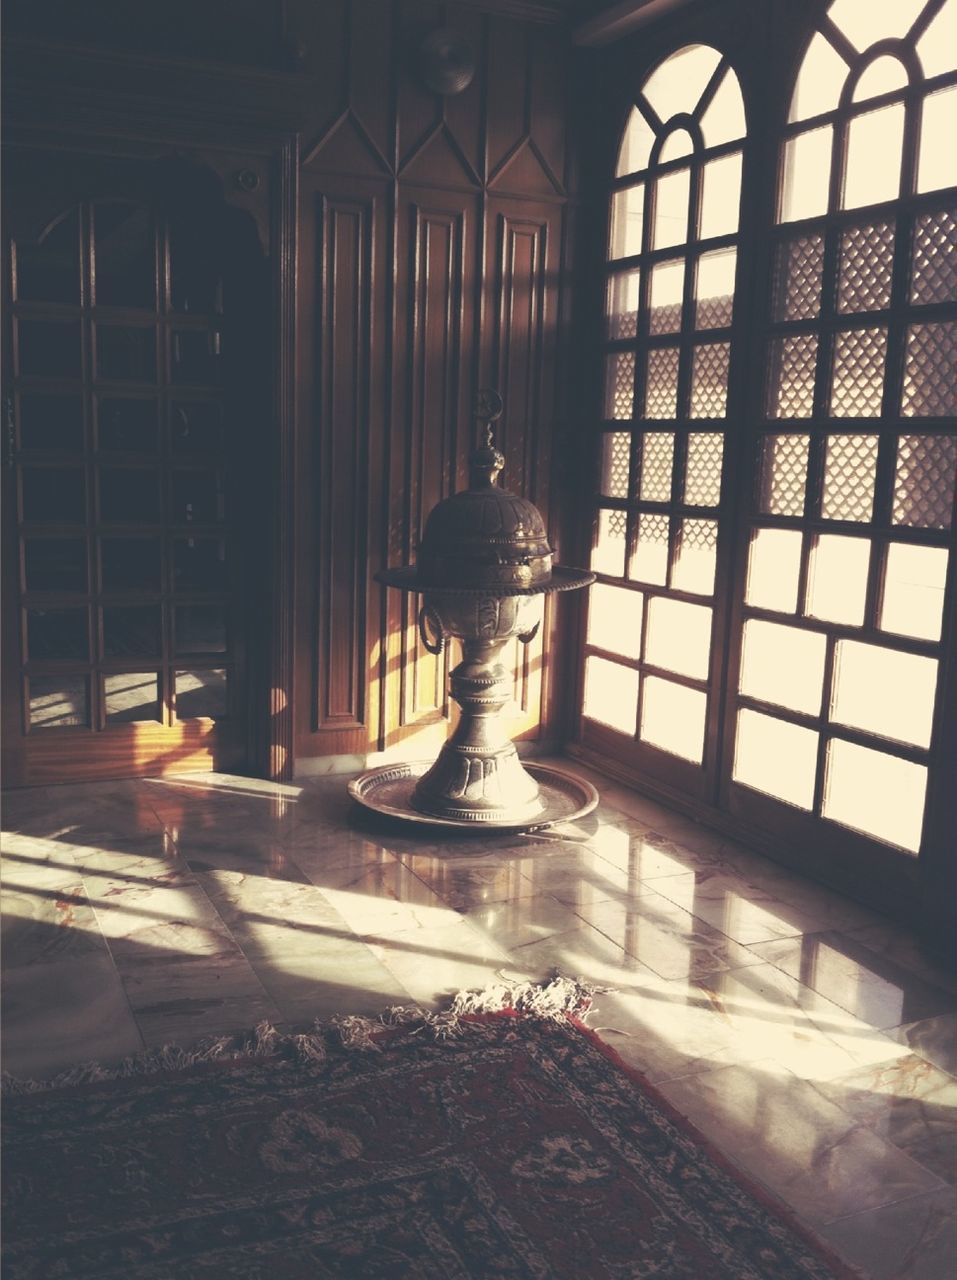 indoors, architecture, built structure, window, architectural column, glass - material, sunlight, lighting equipment, empty, interior, illuminated, no people, day, absence, flooring, transparent, reflection, shadow, ceiling, religion